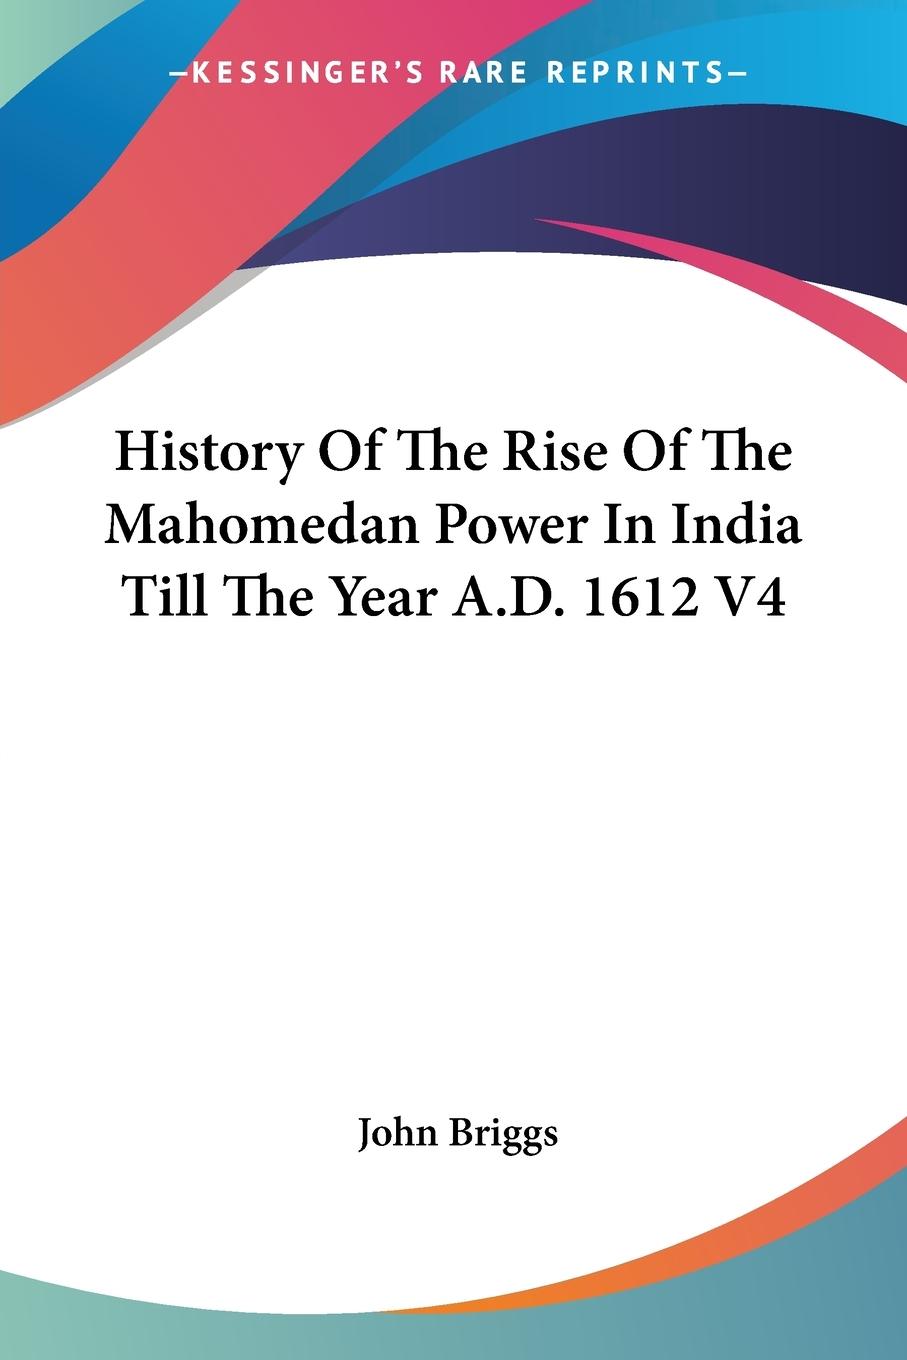 History Of The Rise Of The Mahomedan Power In India Till The Year A.D. 1612 V4